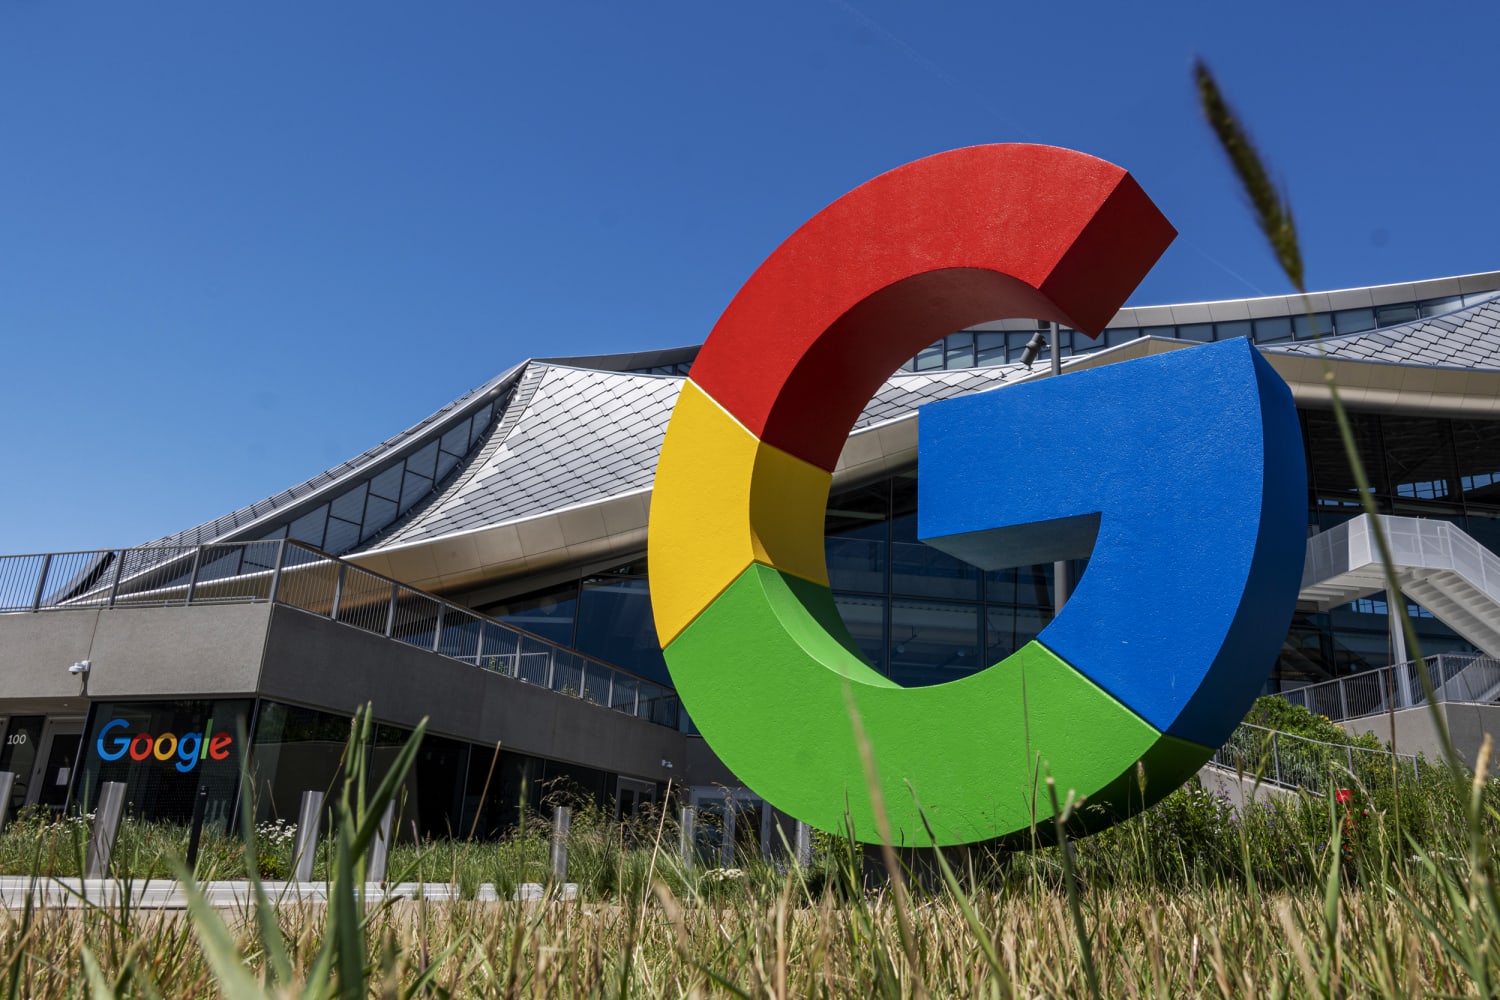 Google users can now ask to have their explicit photos removed from search results